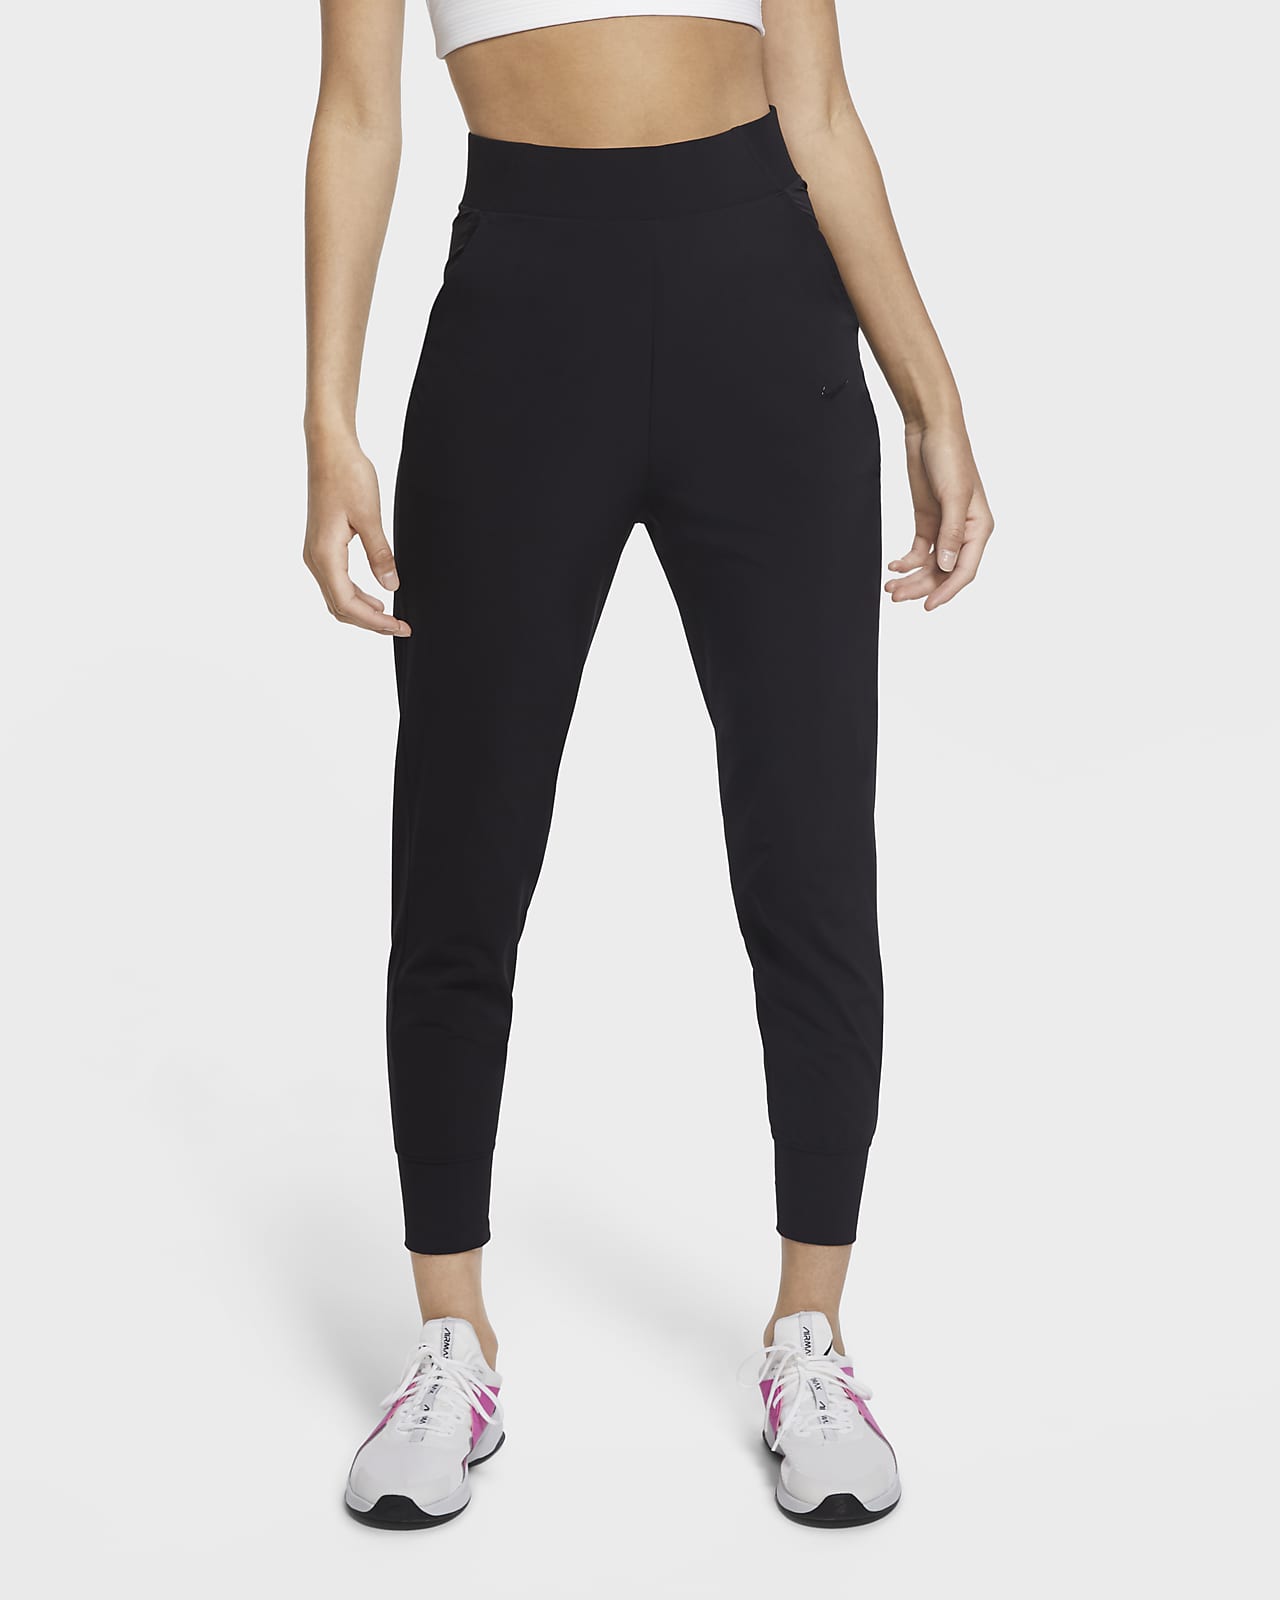 bliss lux slim fit nike